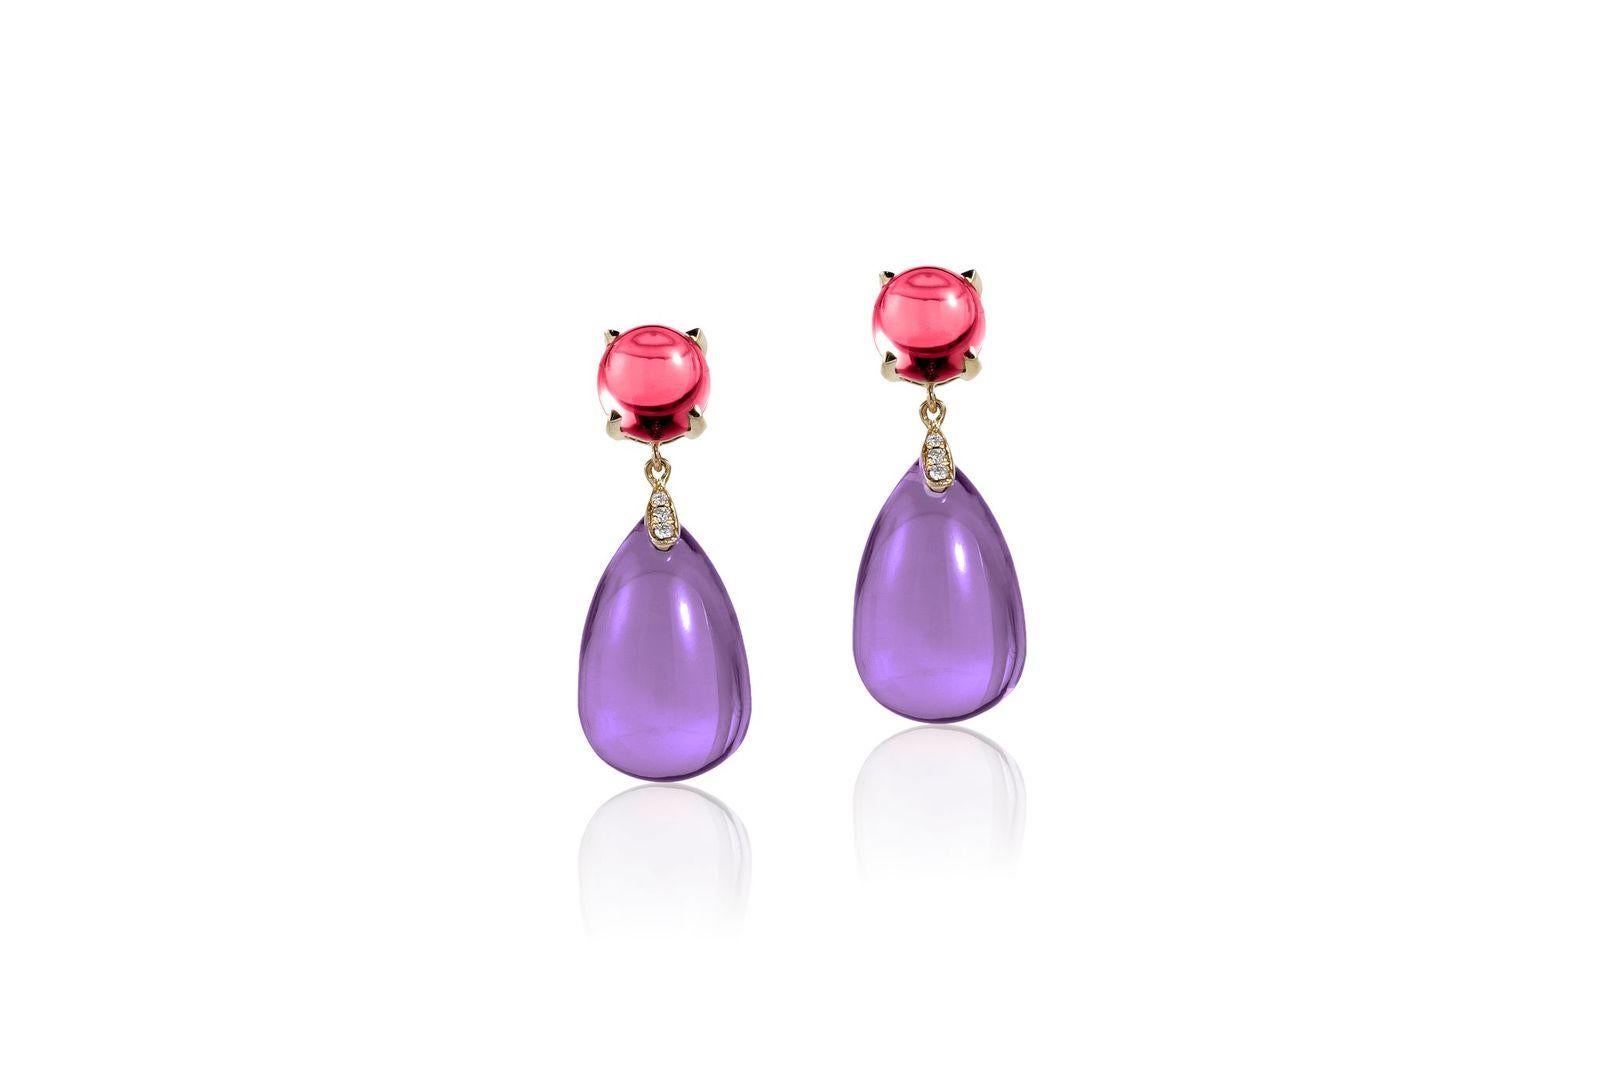 Amethyst and Garnet Cabochon Drop Earrings with Diamonds in 18K Yellow Gold, from 'Naughty' Collection

Stone Size: 19 x 12 mm & 8 mm 

Gemstone Approx Wt: Amethyst-Garnet – 42.78 Carats

Diamonds: G-H / VS, Approx Wt: 0.04 Carats